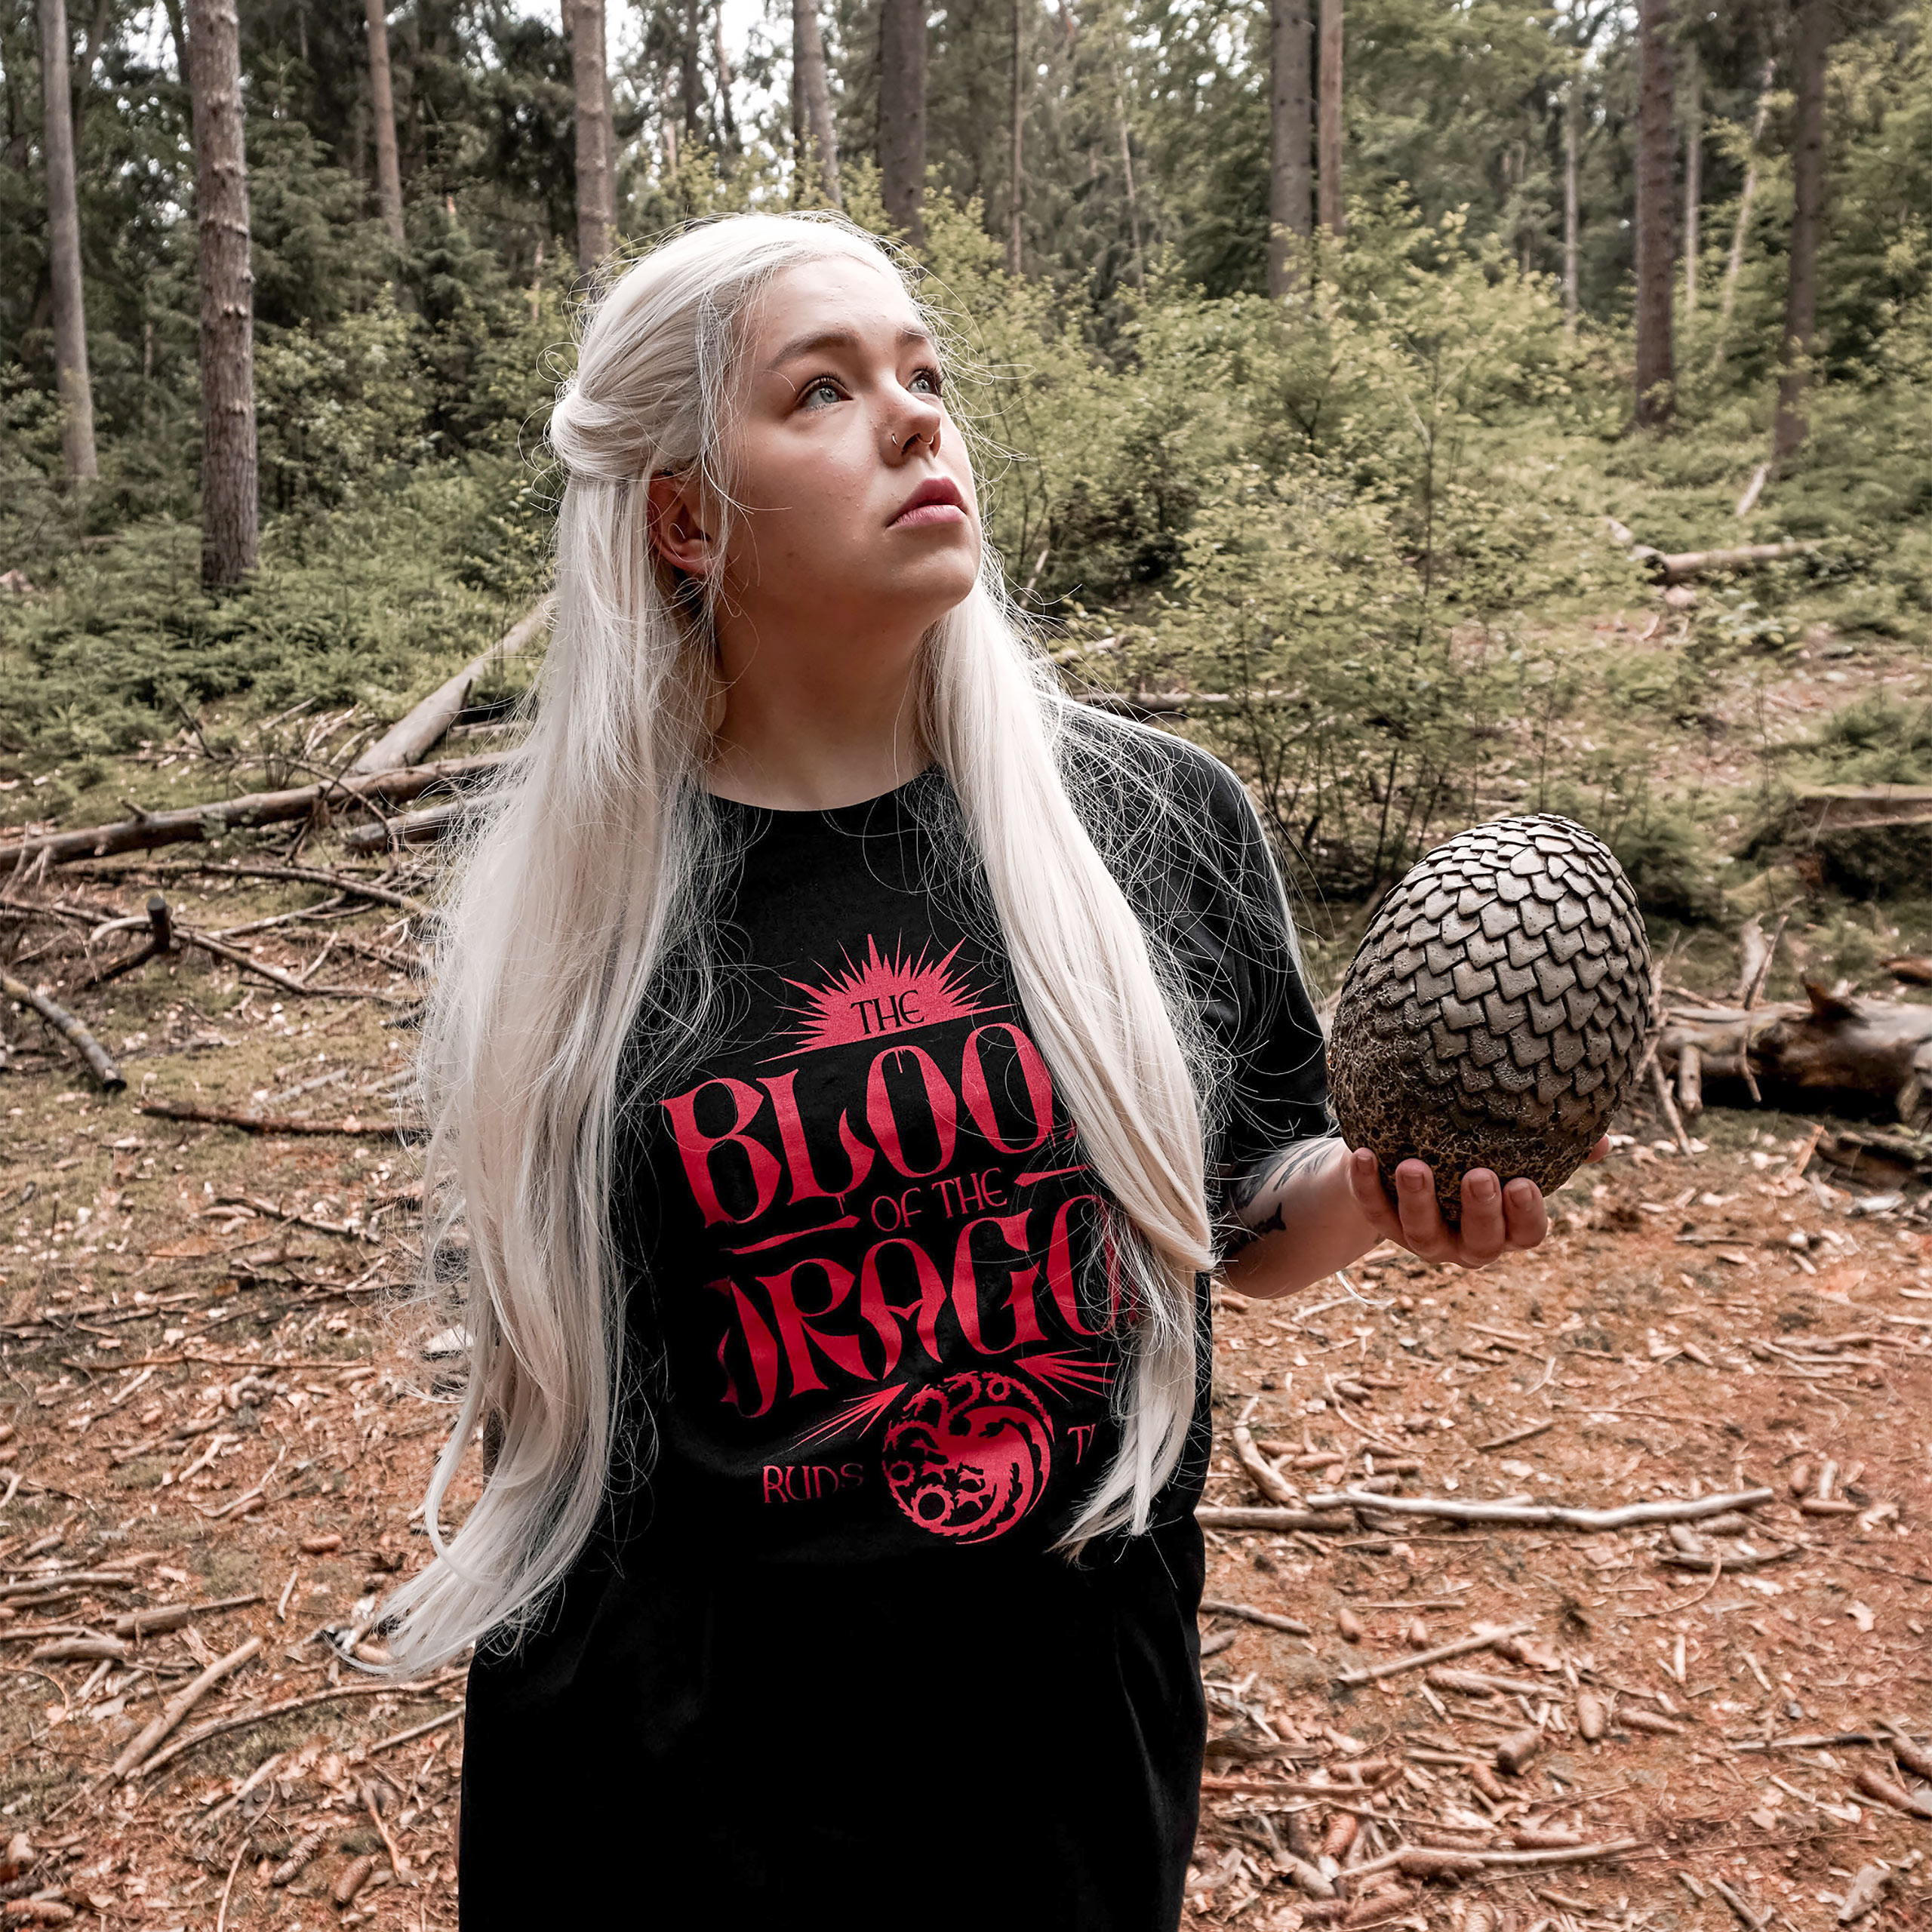 Blood of the Dragon T-Shirt - House of the Dragon